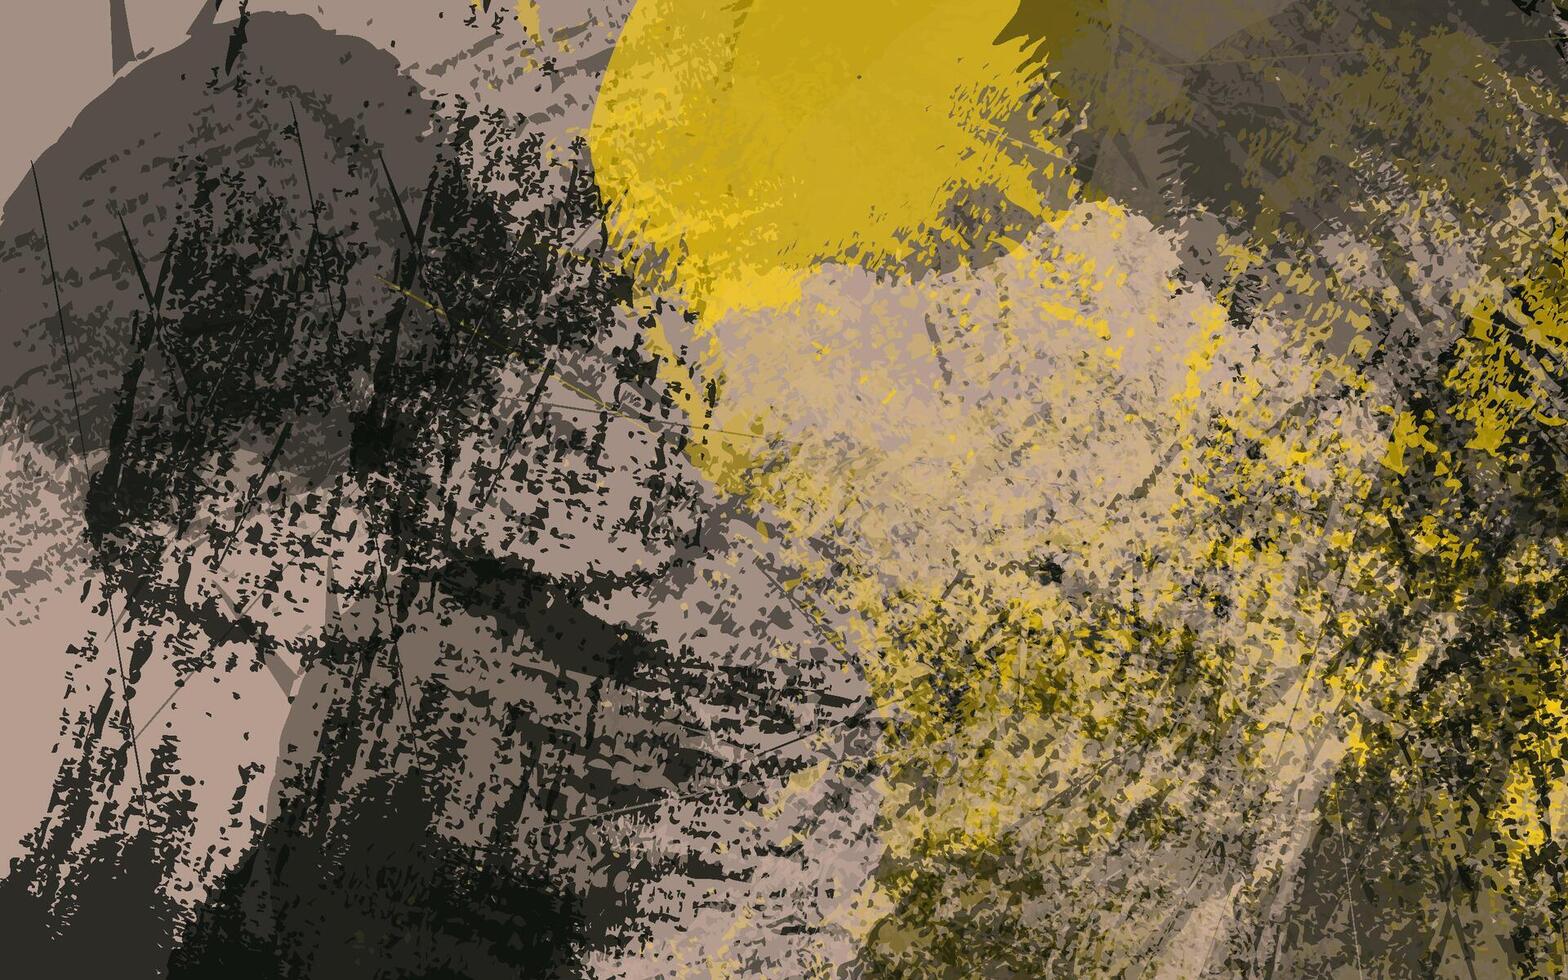 Abstract grunge texture black and yellow color background vector